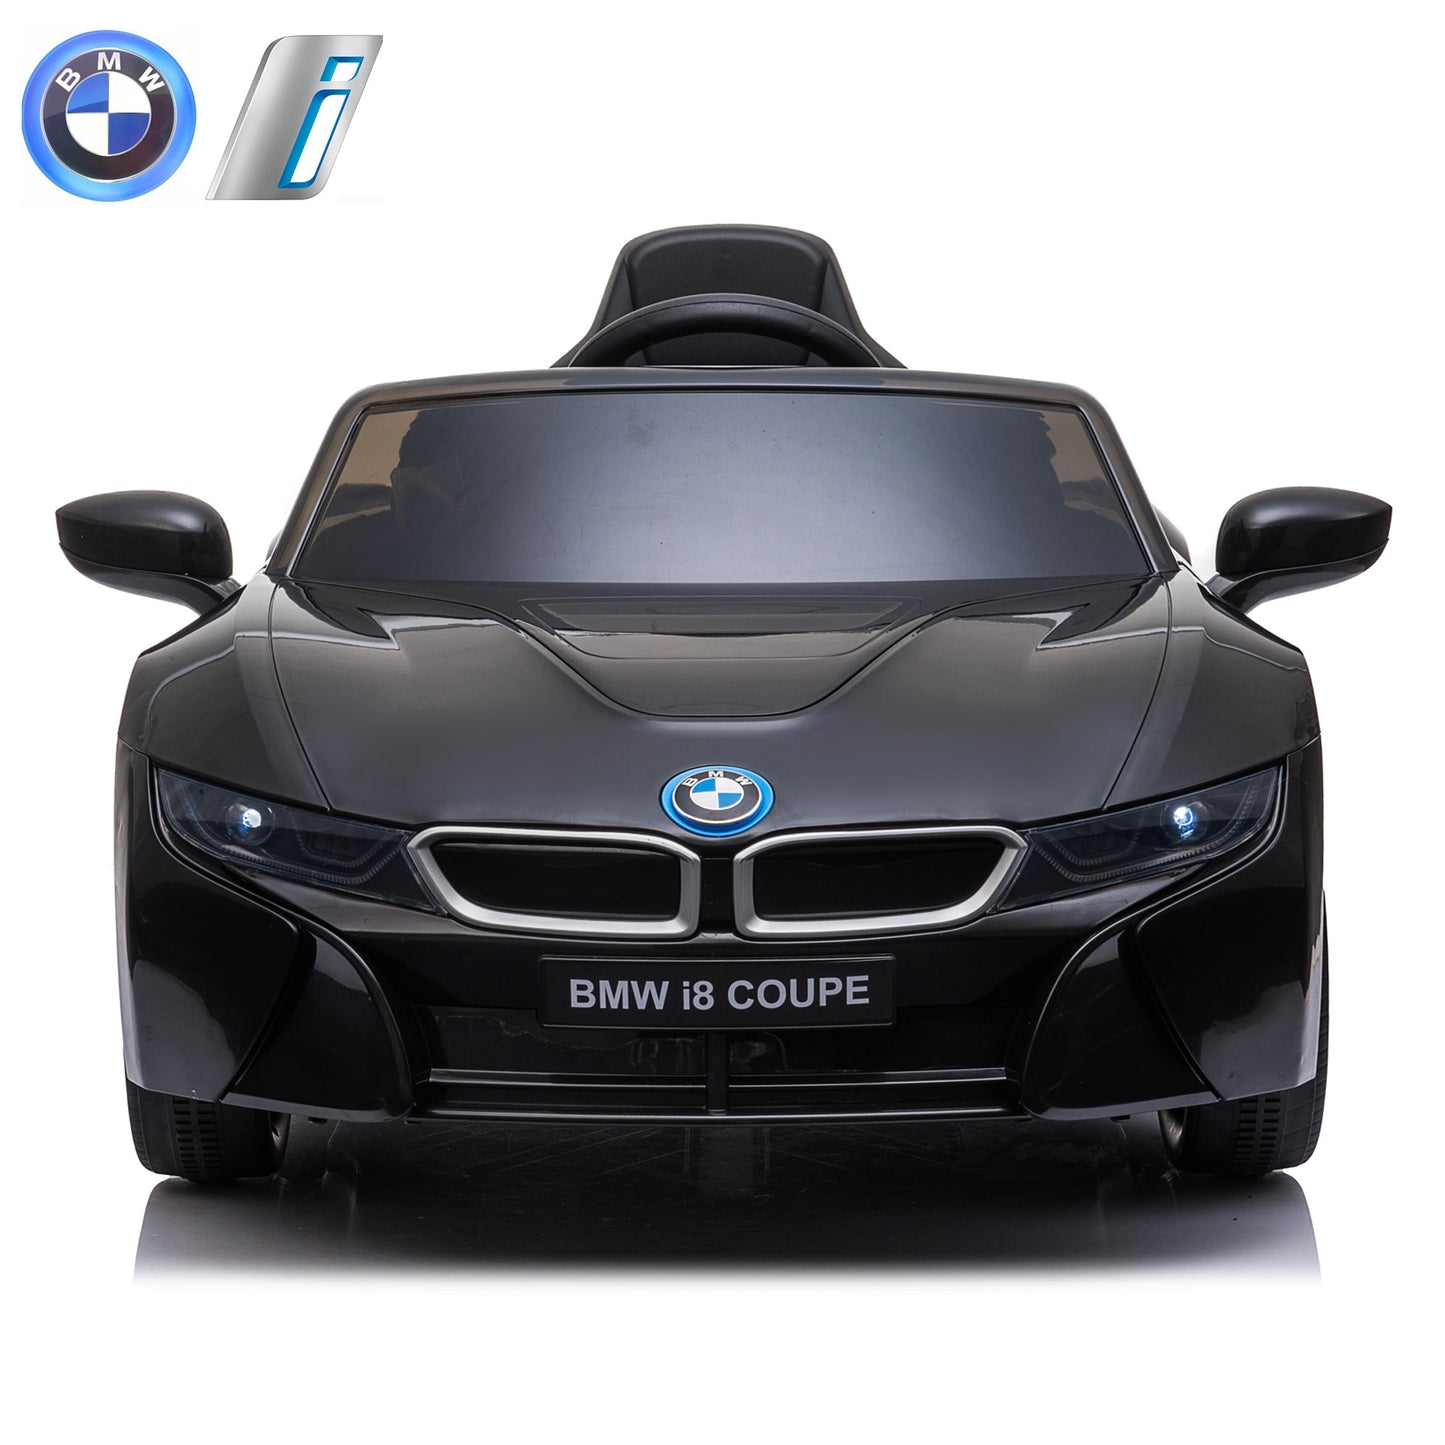 New Licensed BMW I8 Coupe 12V Kids Ride on Toy Car With Remote - Black